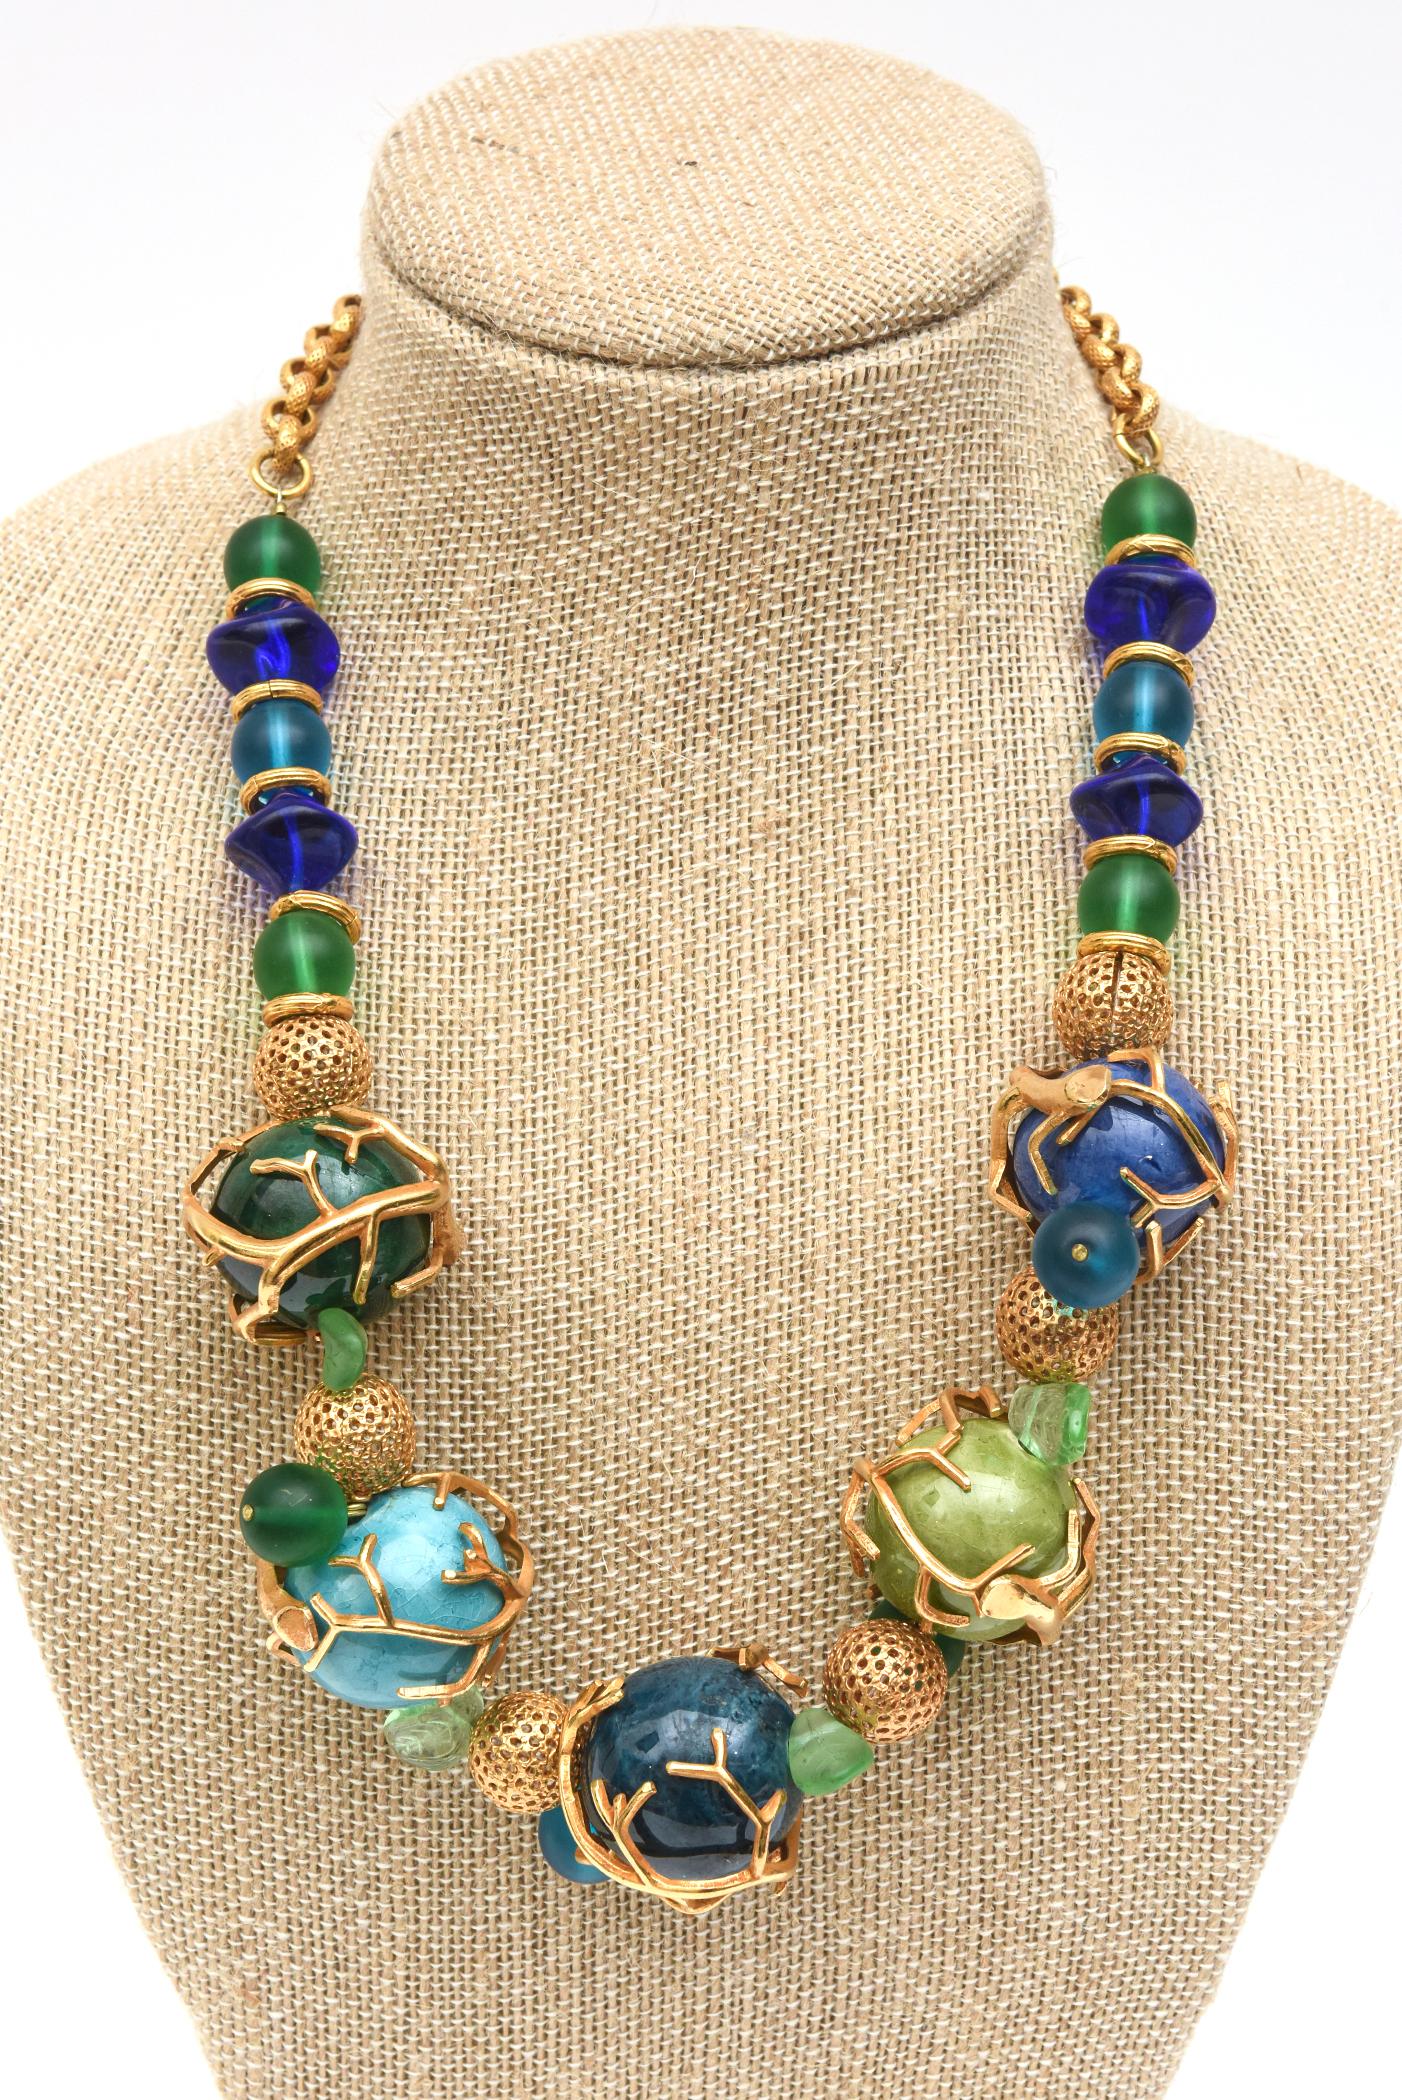 This stunning work of jewelry designer signed French necklace is by Philippe Ferrandis and looks like art and sculpture. It is labeled and also noted Paris. The luscious colors of the sky and sea incorporate the colors of turquoise, purple, green,